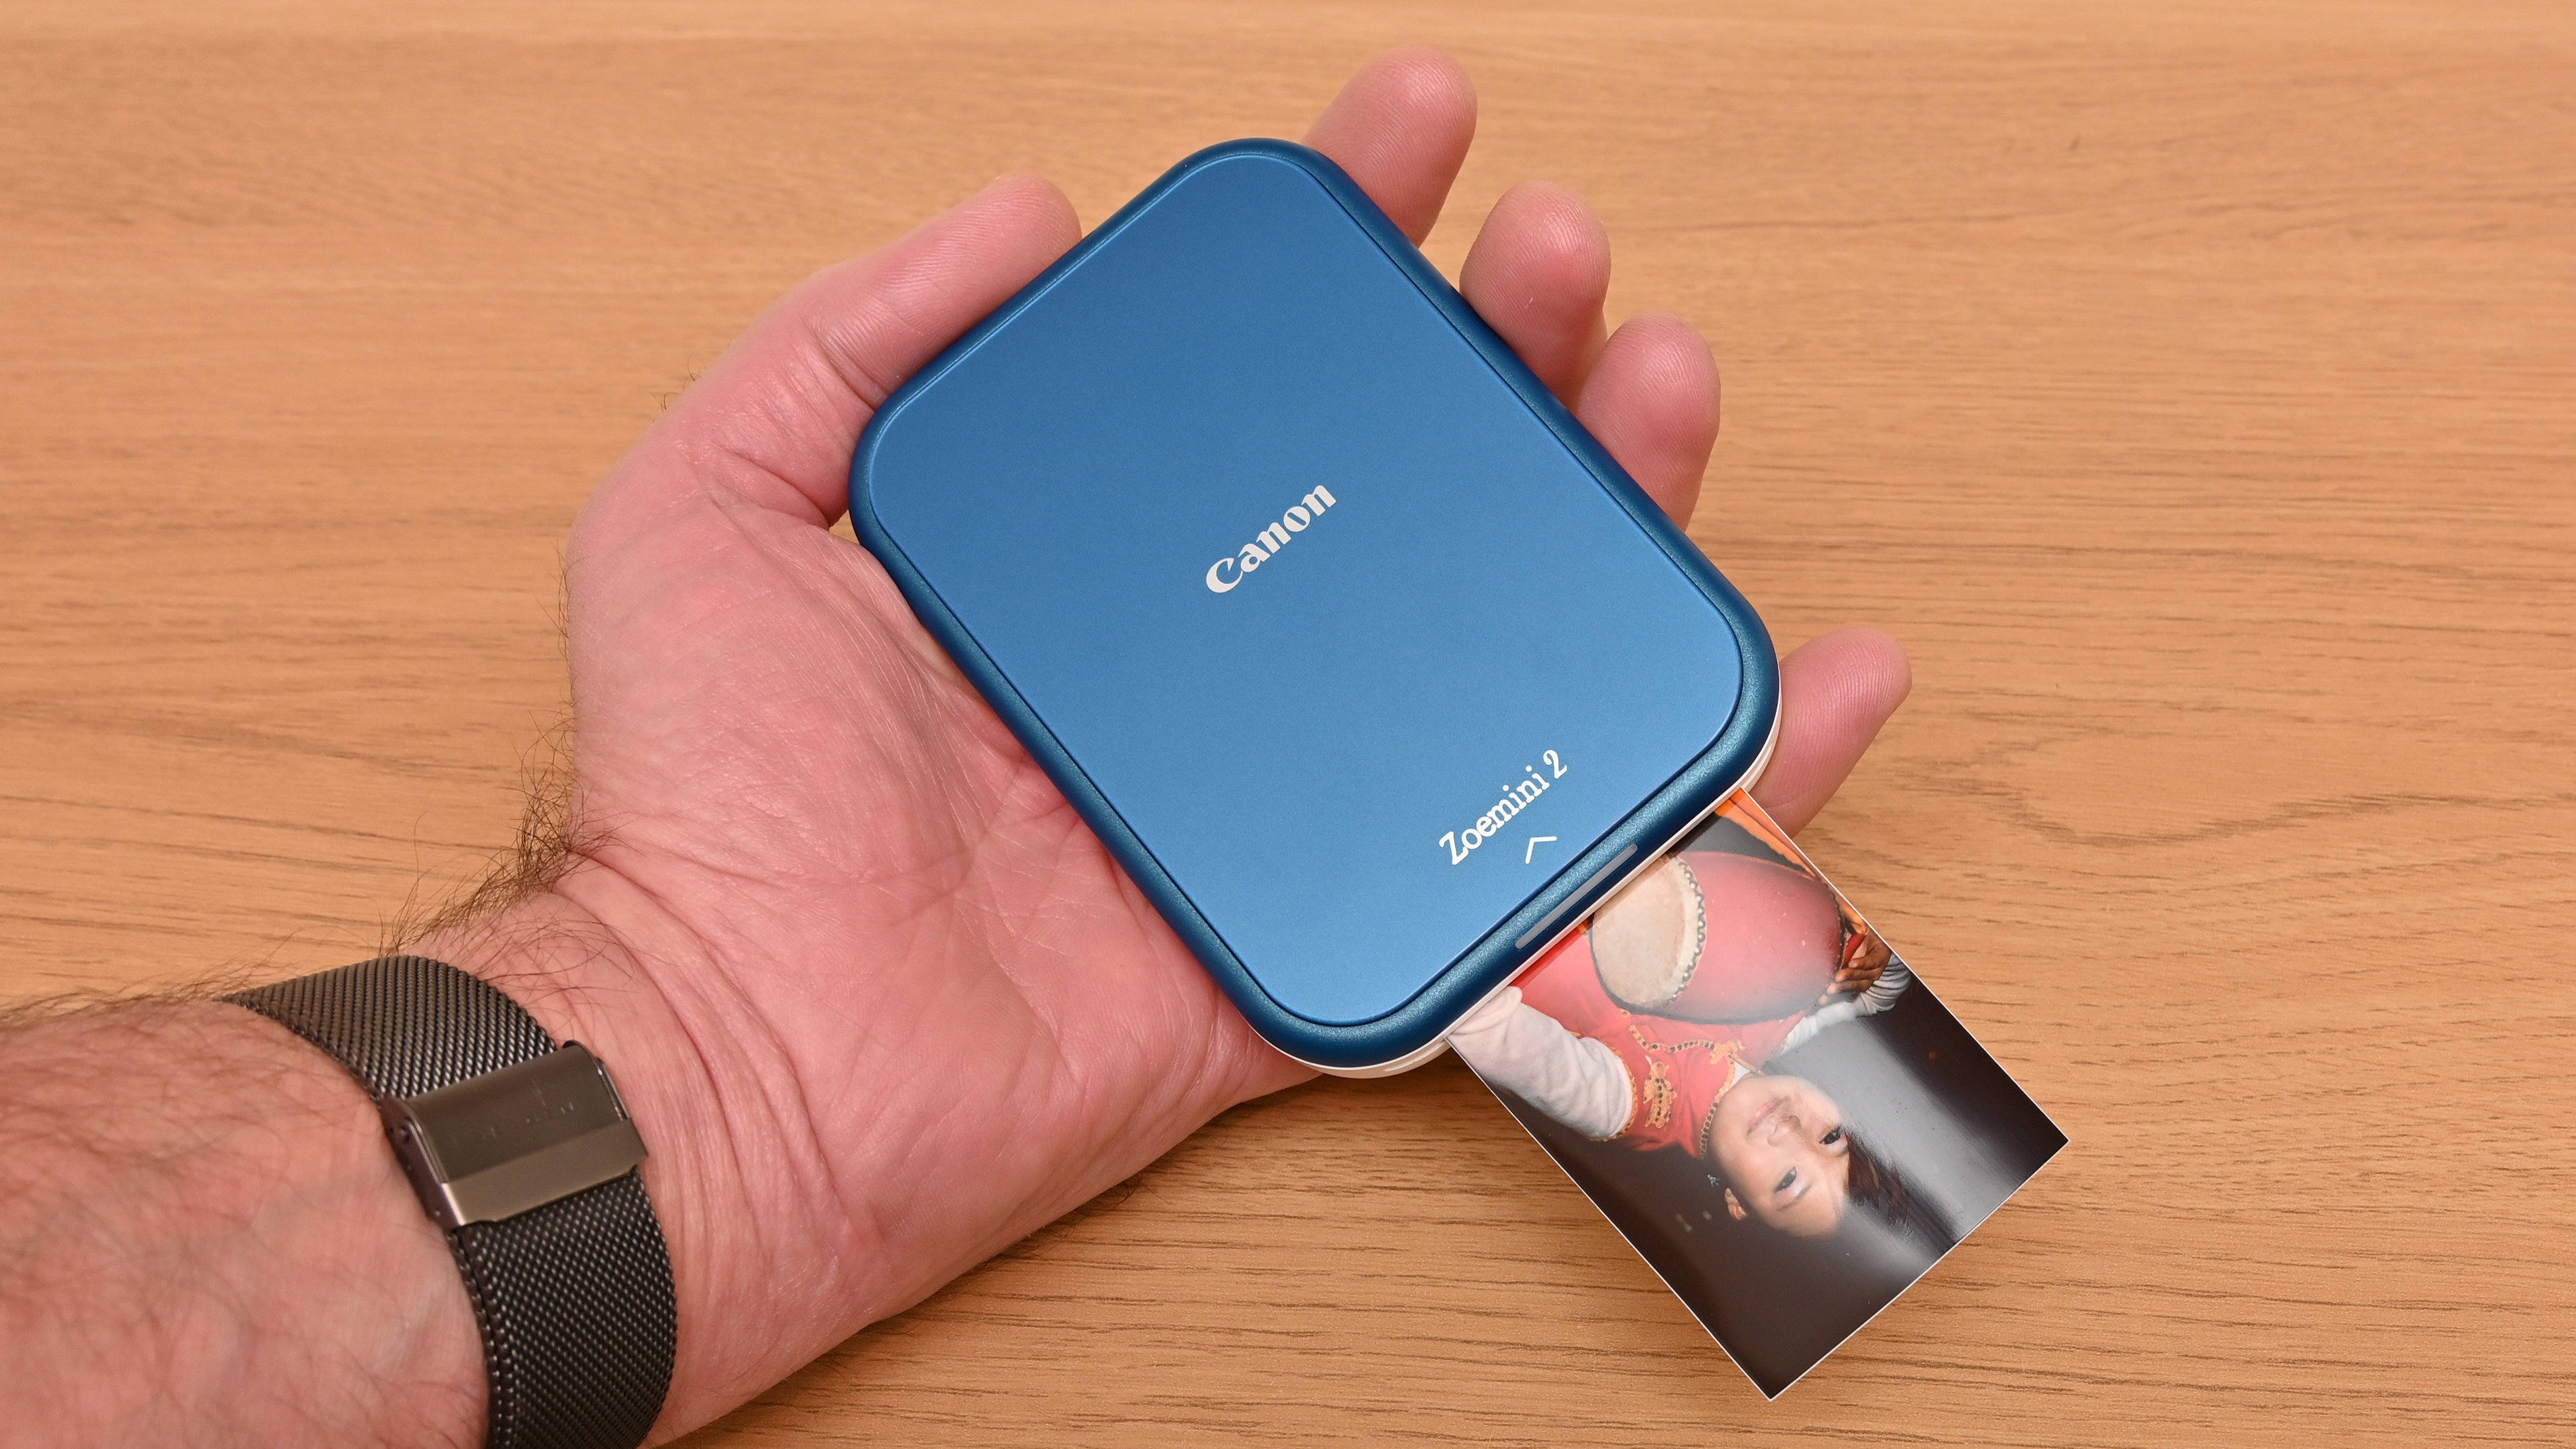 Canon launches their 2x3 mobile photo printer in Europe as the Zoemini